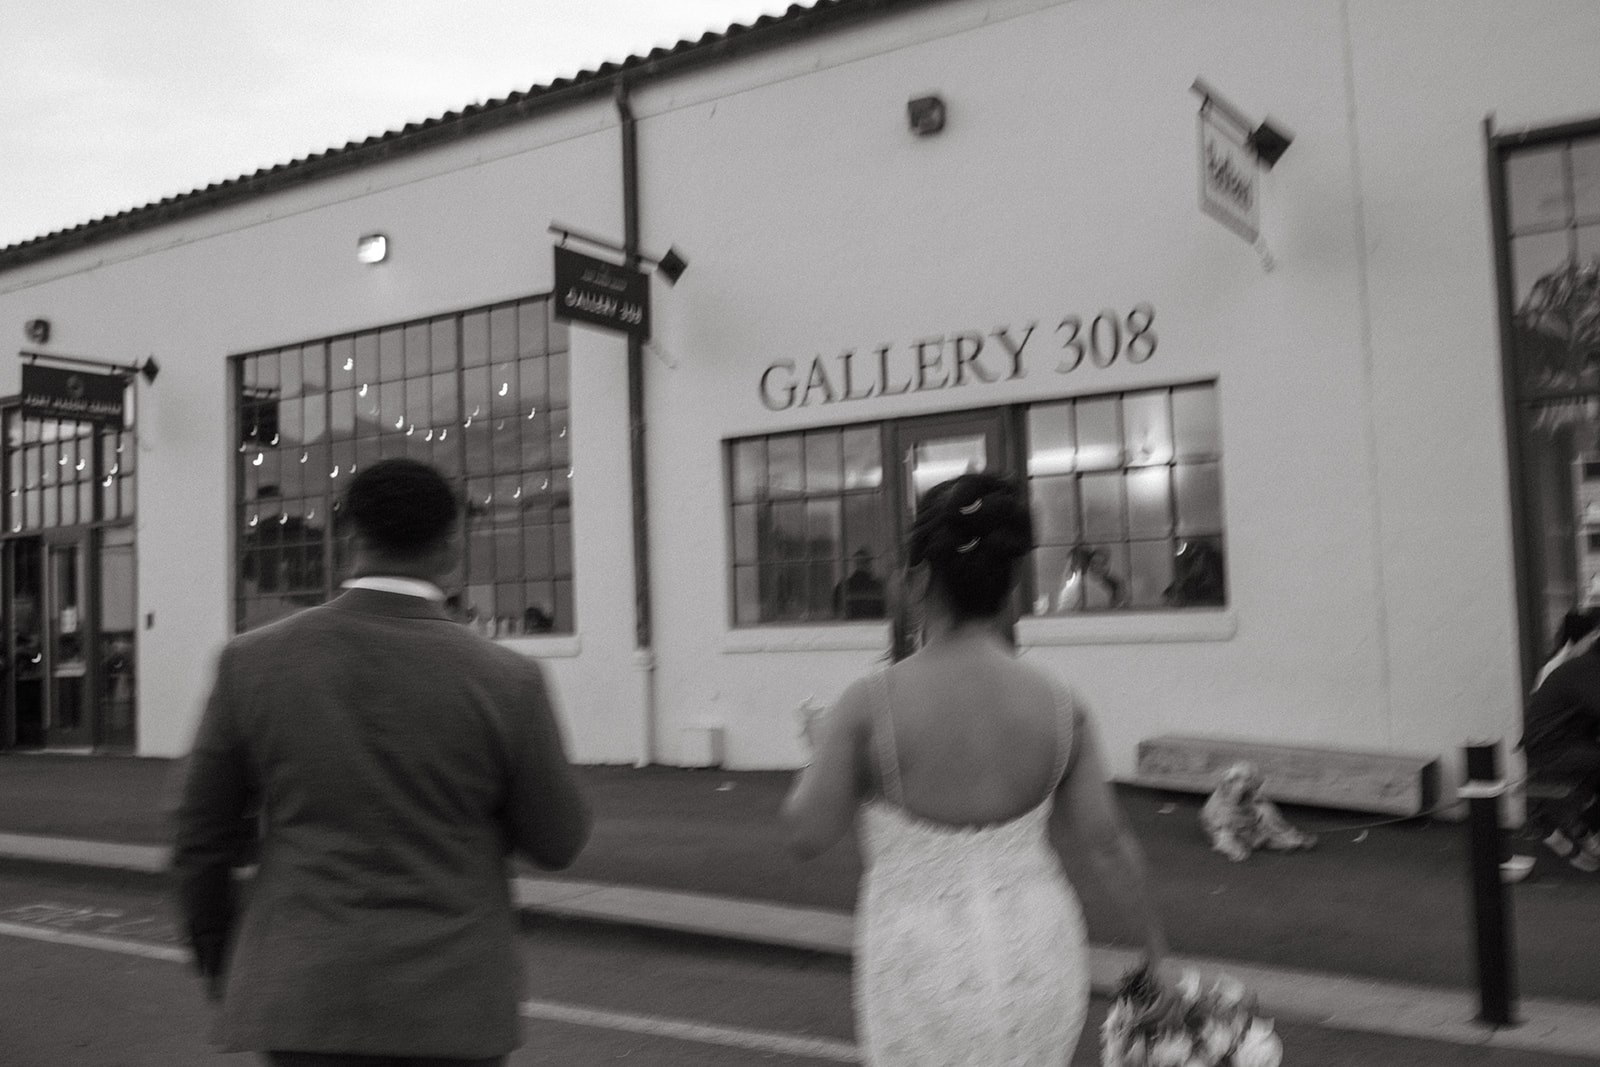 A couple who got married and had their wedding reception at Gallery 308 San Francisco